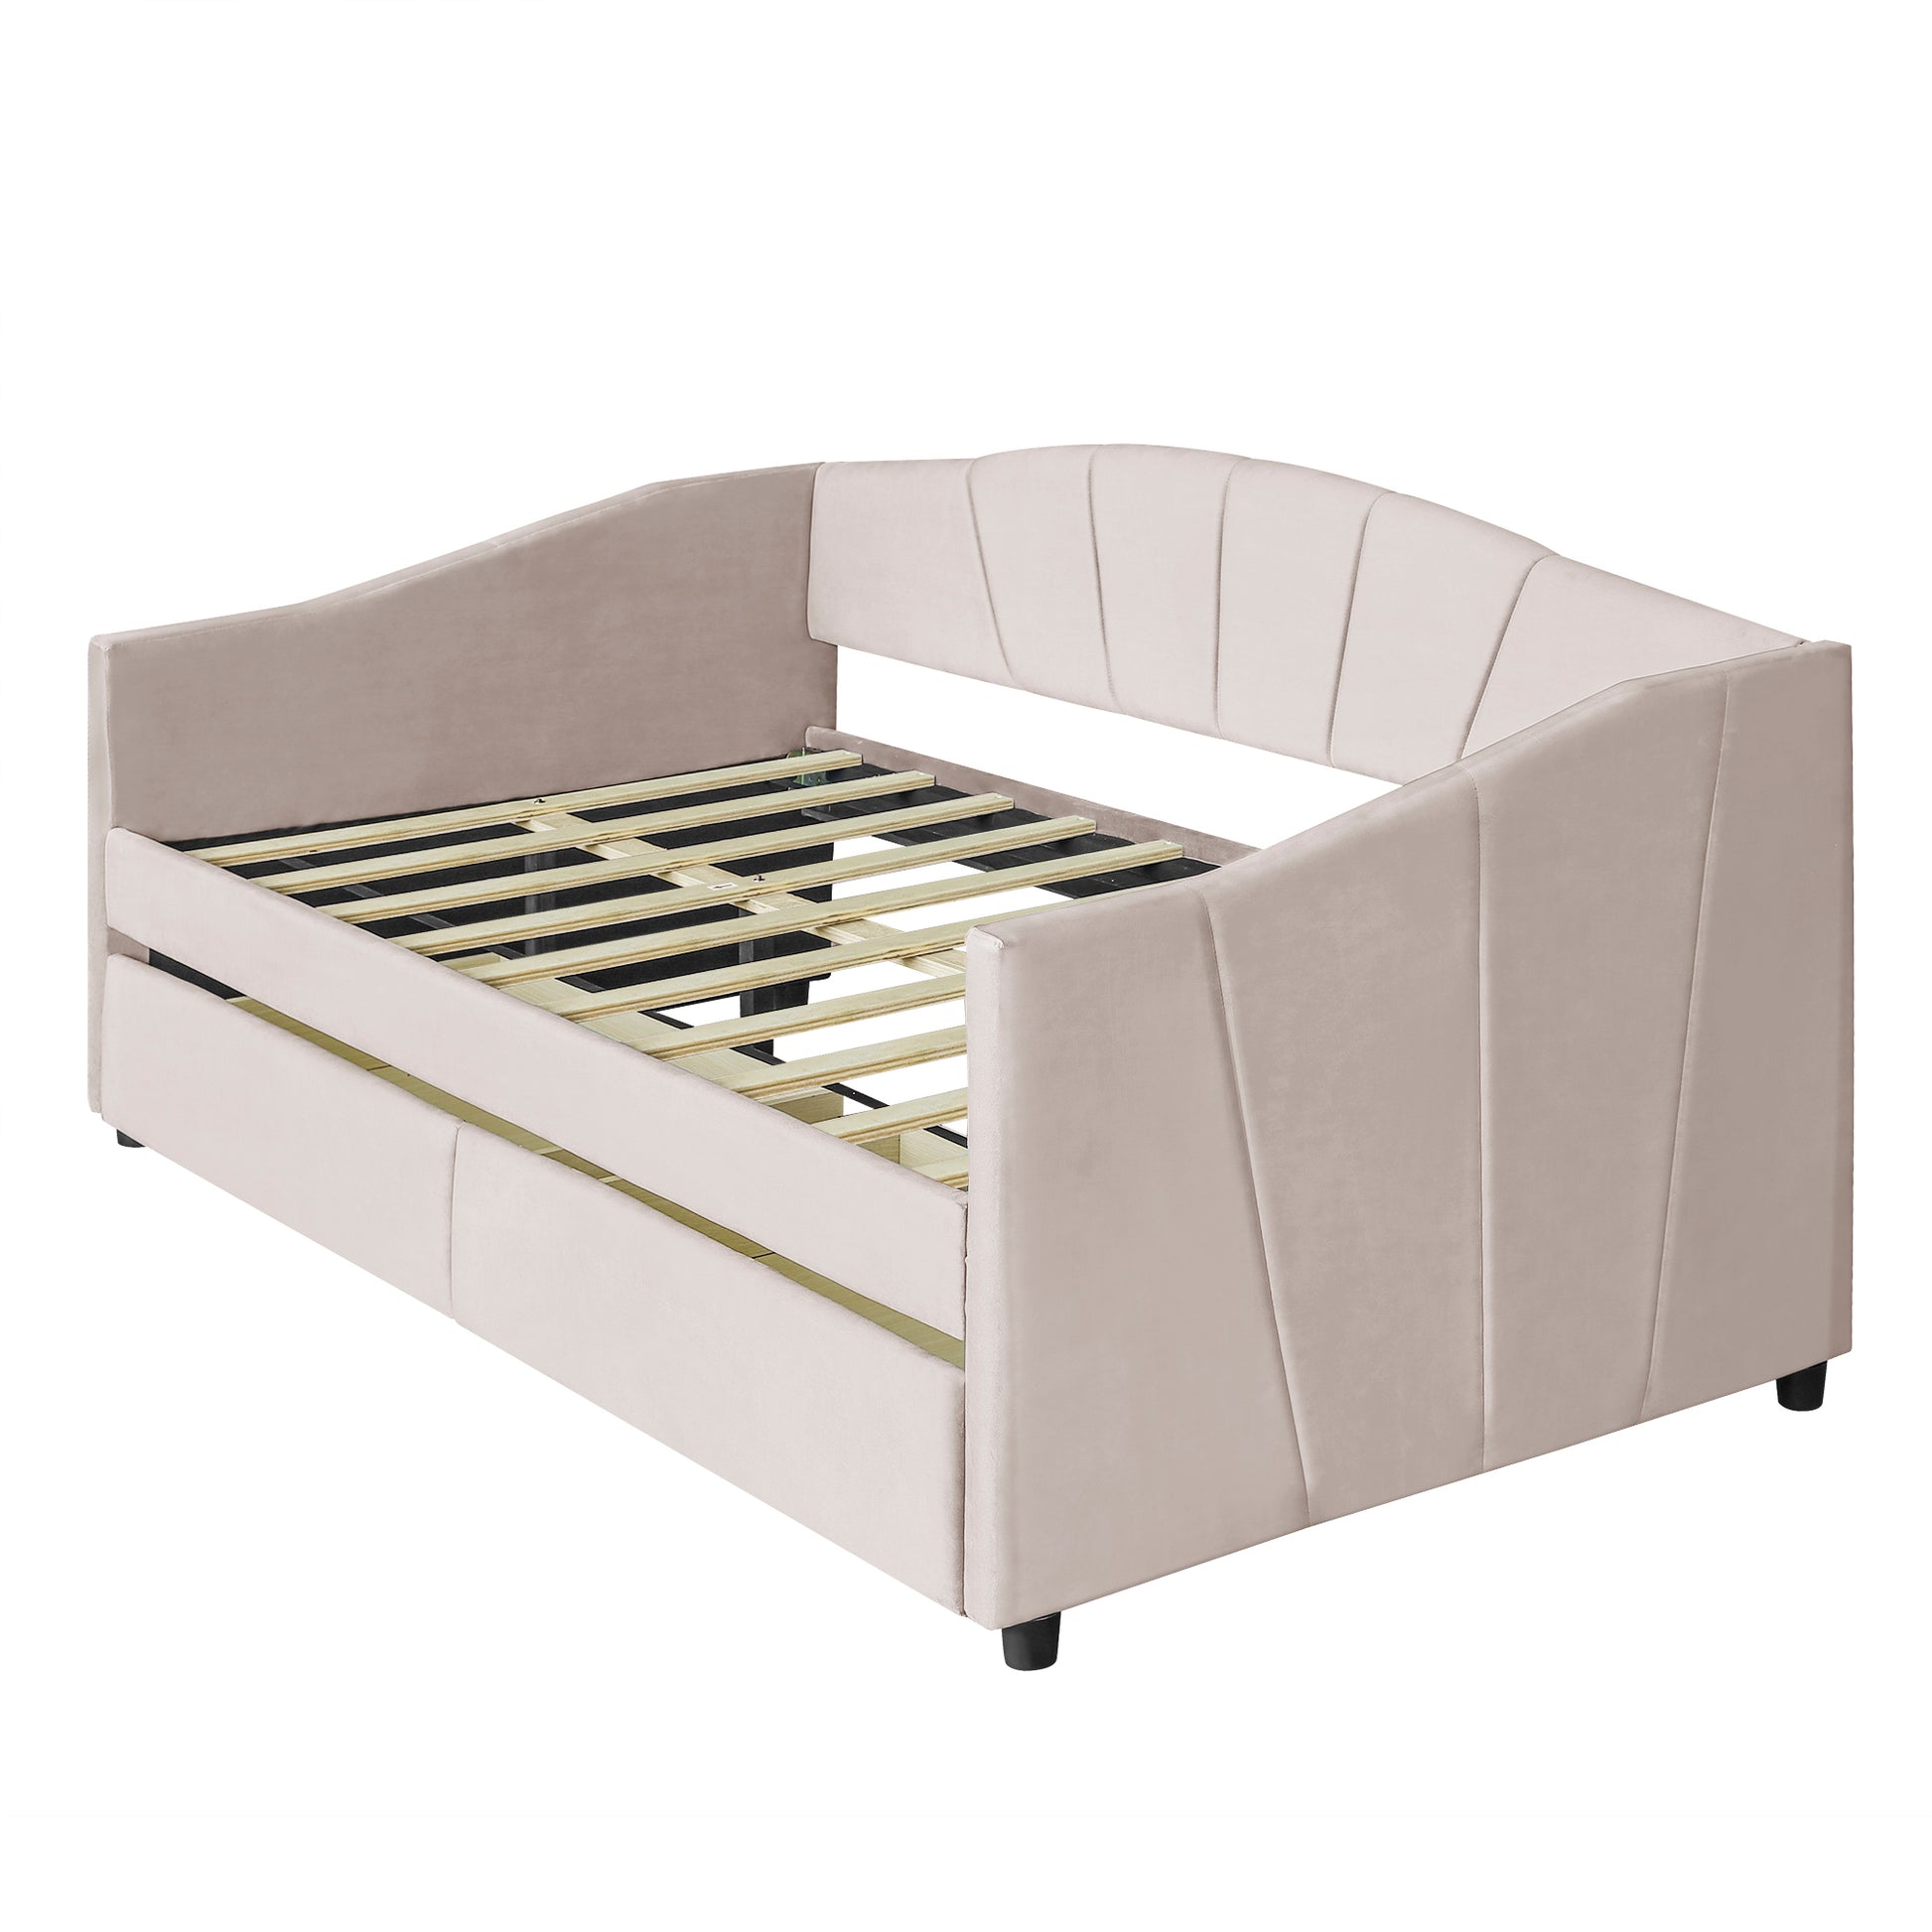 Upholstered daybed Twin Size with Two Drawers and Wood Slat ,Beige